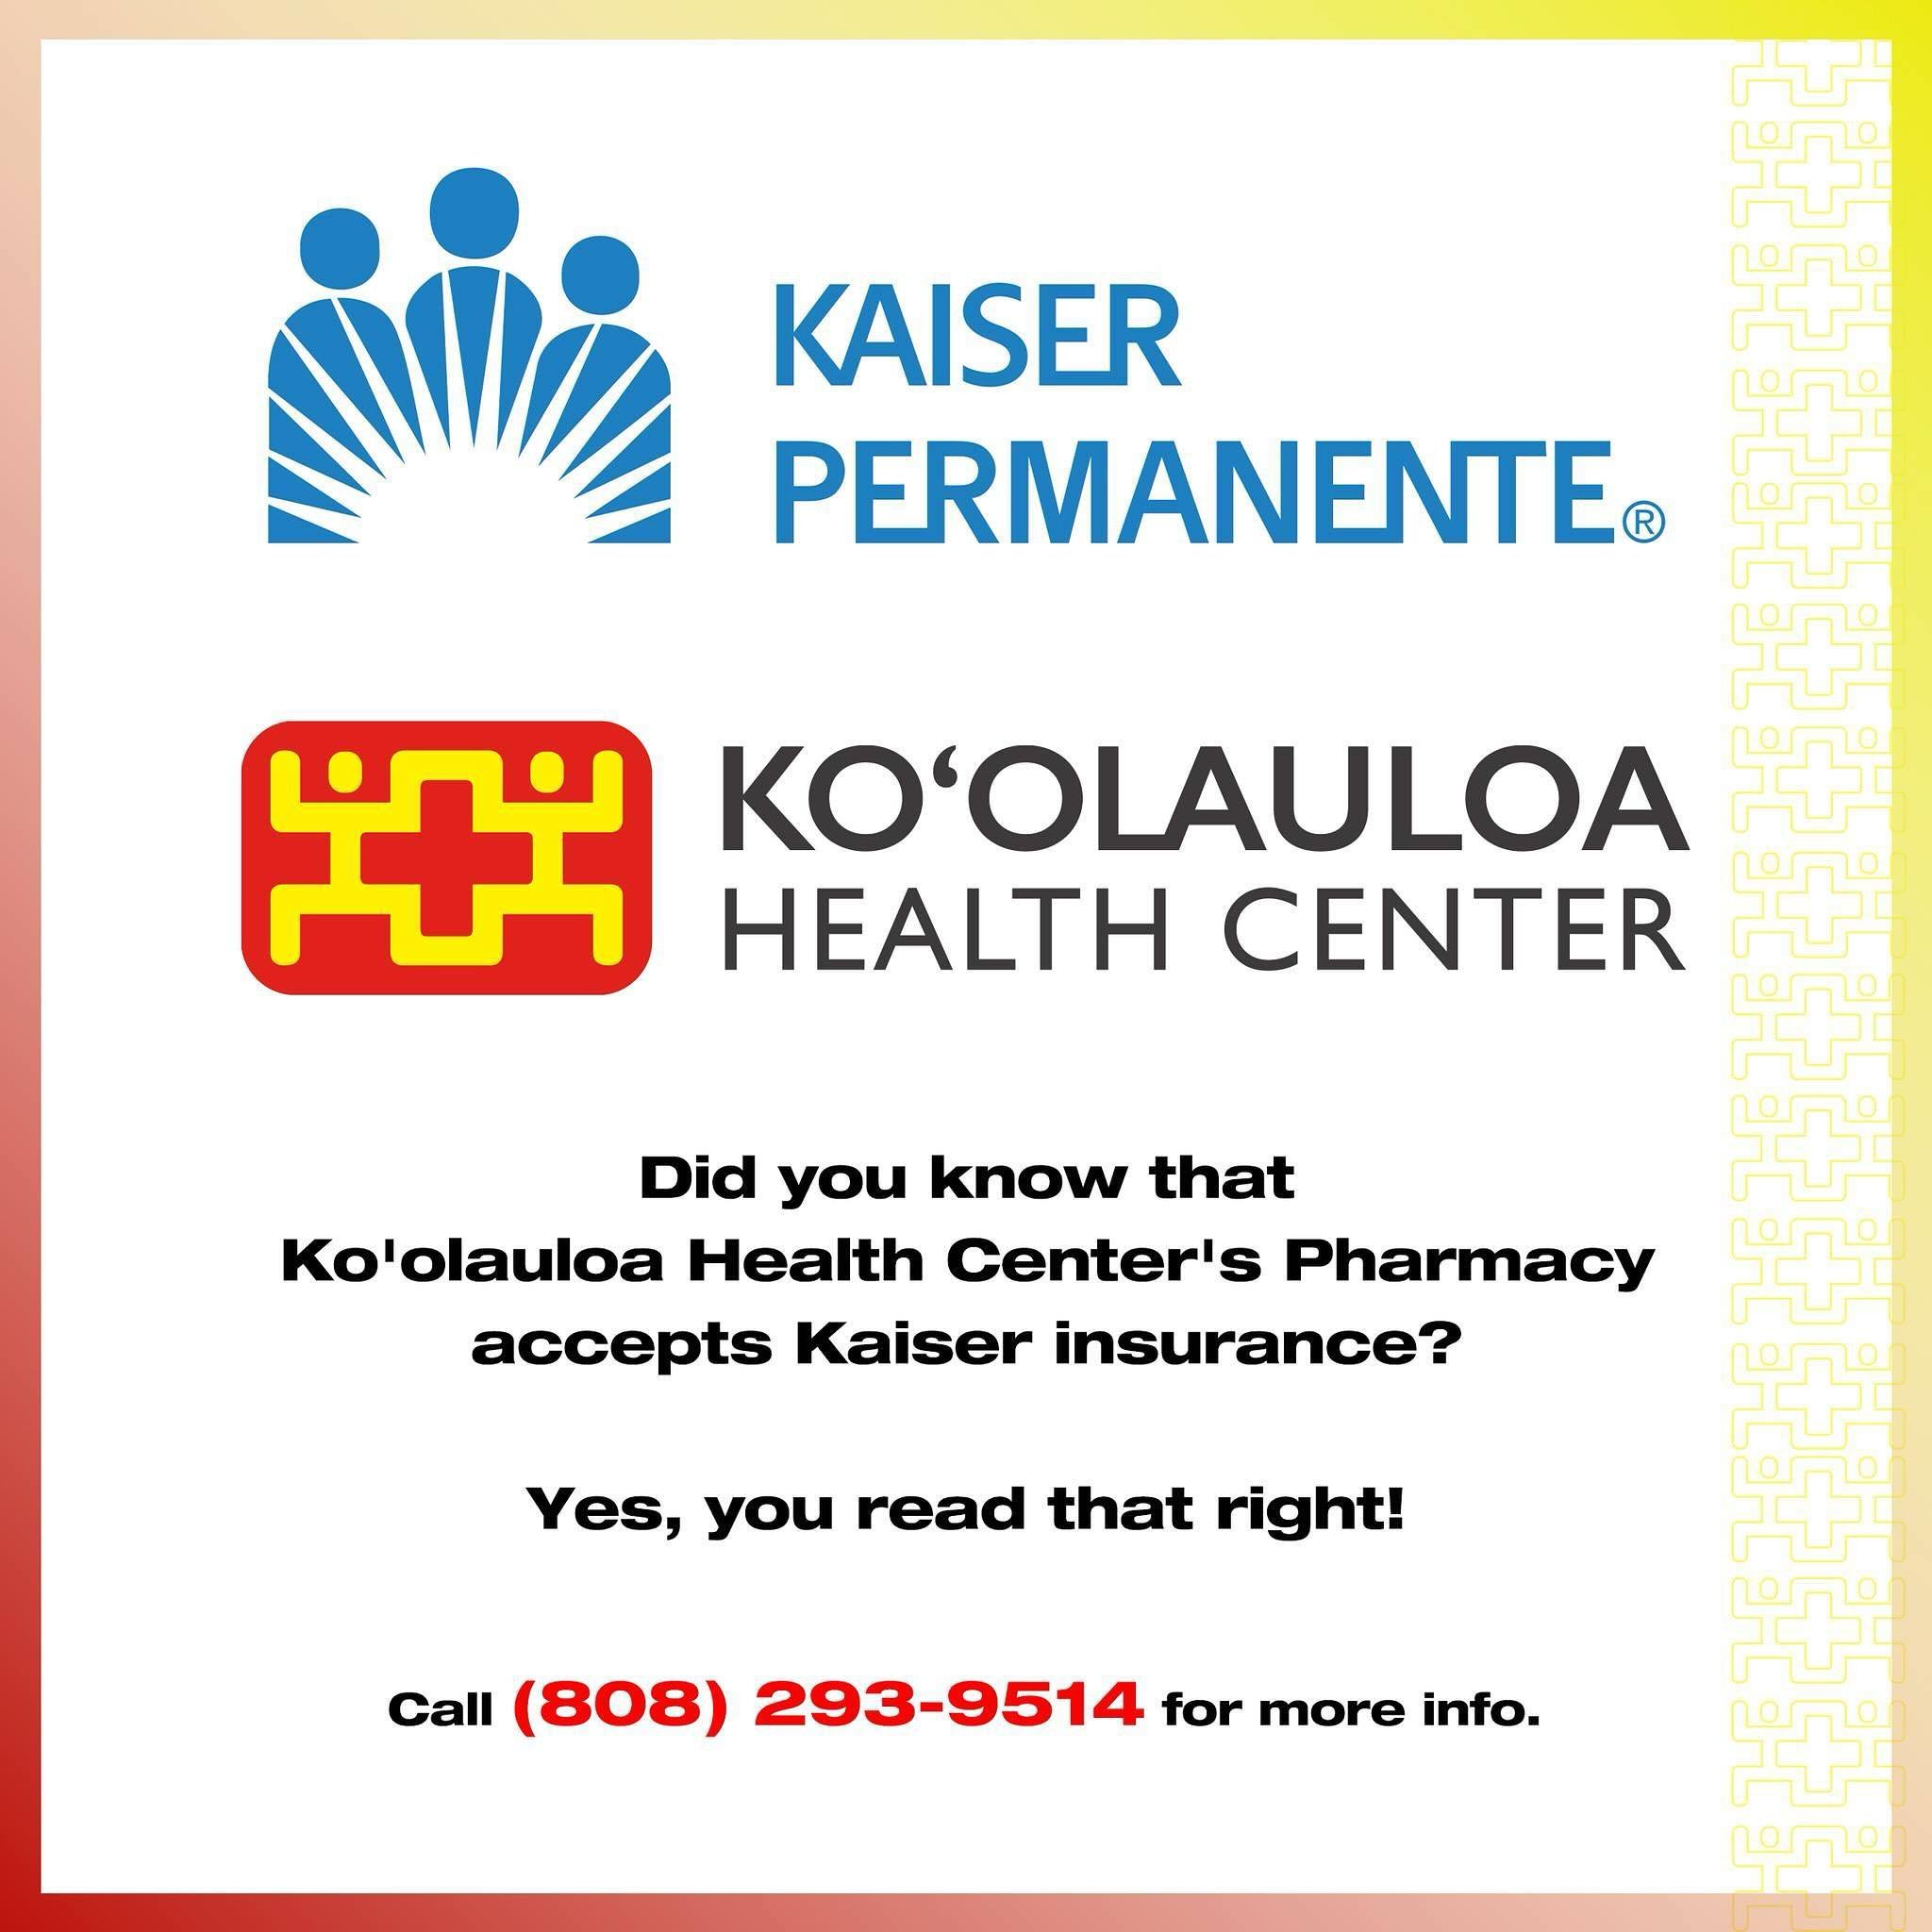 Aloha &lsquo;Ohana!

Did you know that Ko&rsquo;olauloa Health Center&rsquo;s Pharmacy accepts Kaiser insurance? Yes, you read that right!

If you have Kaiser insurance and want a convenient Ko&rsquo;olauloa pharmacy to pick up medications, look no f